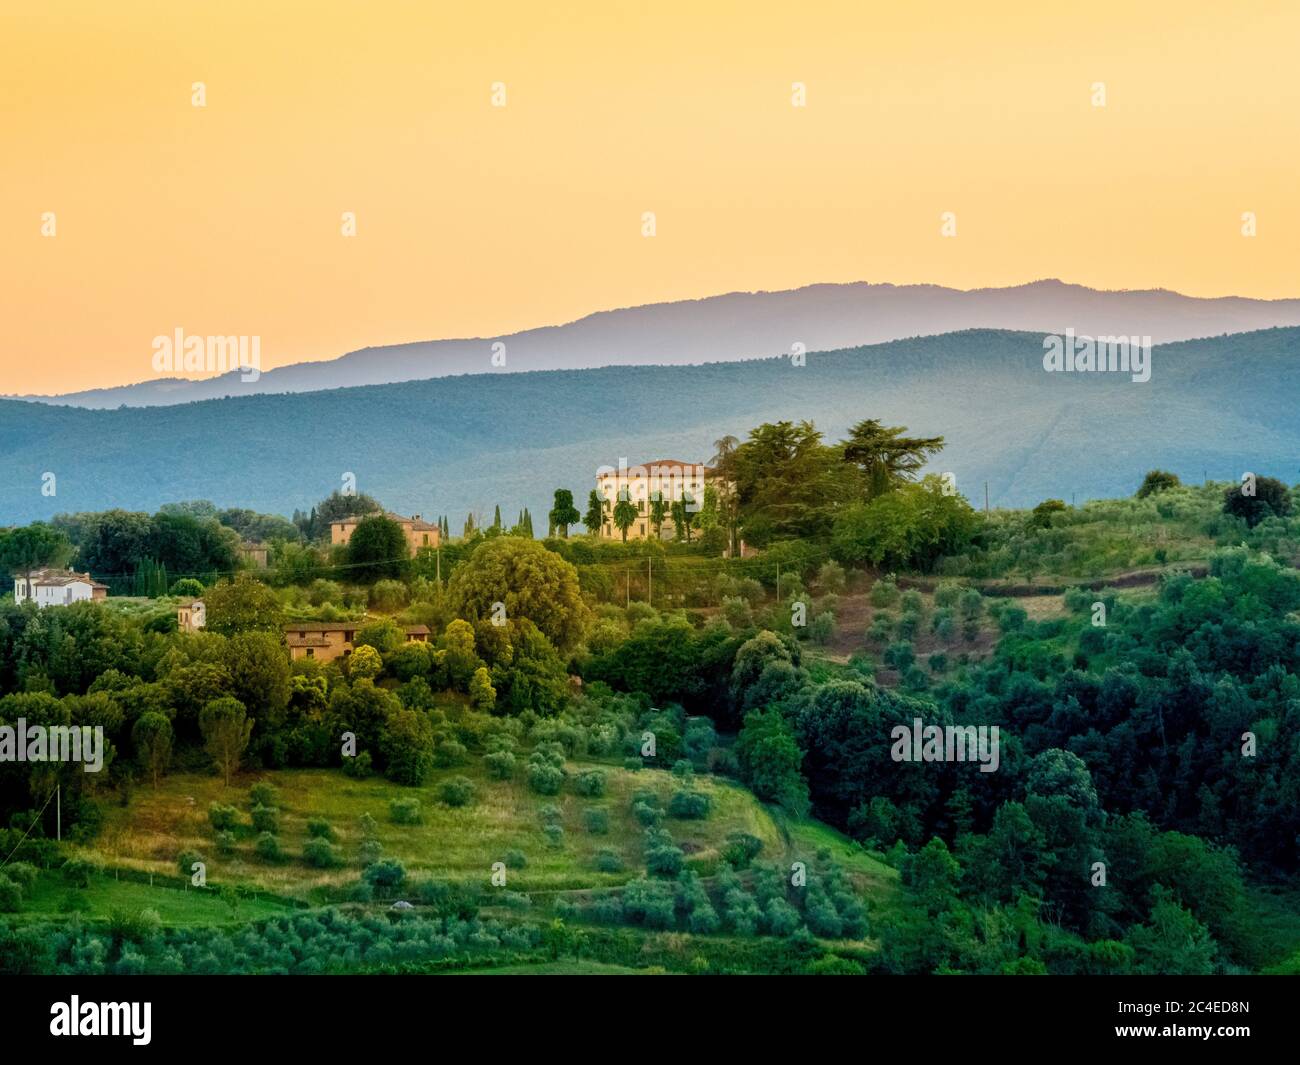 Villas surrounded by trees in rural Siena, Italy. Stock Photo